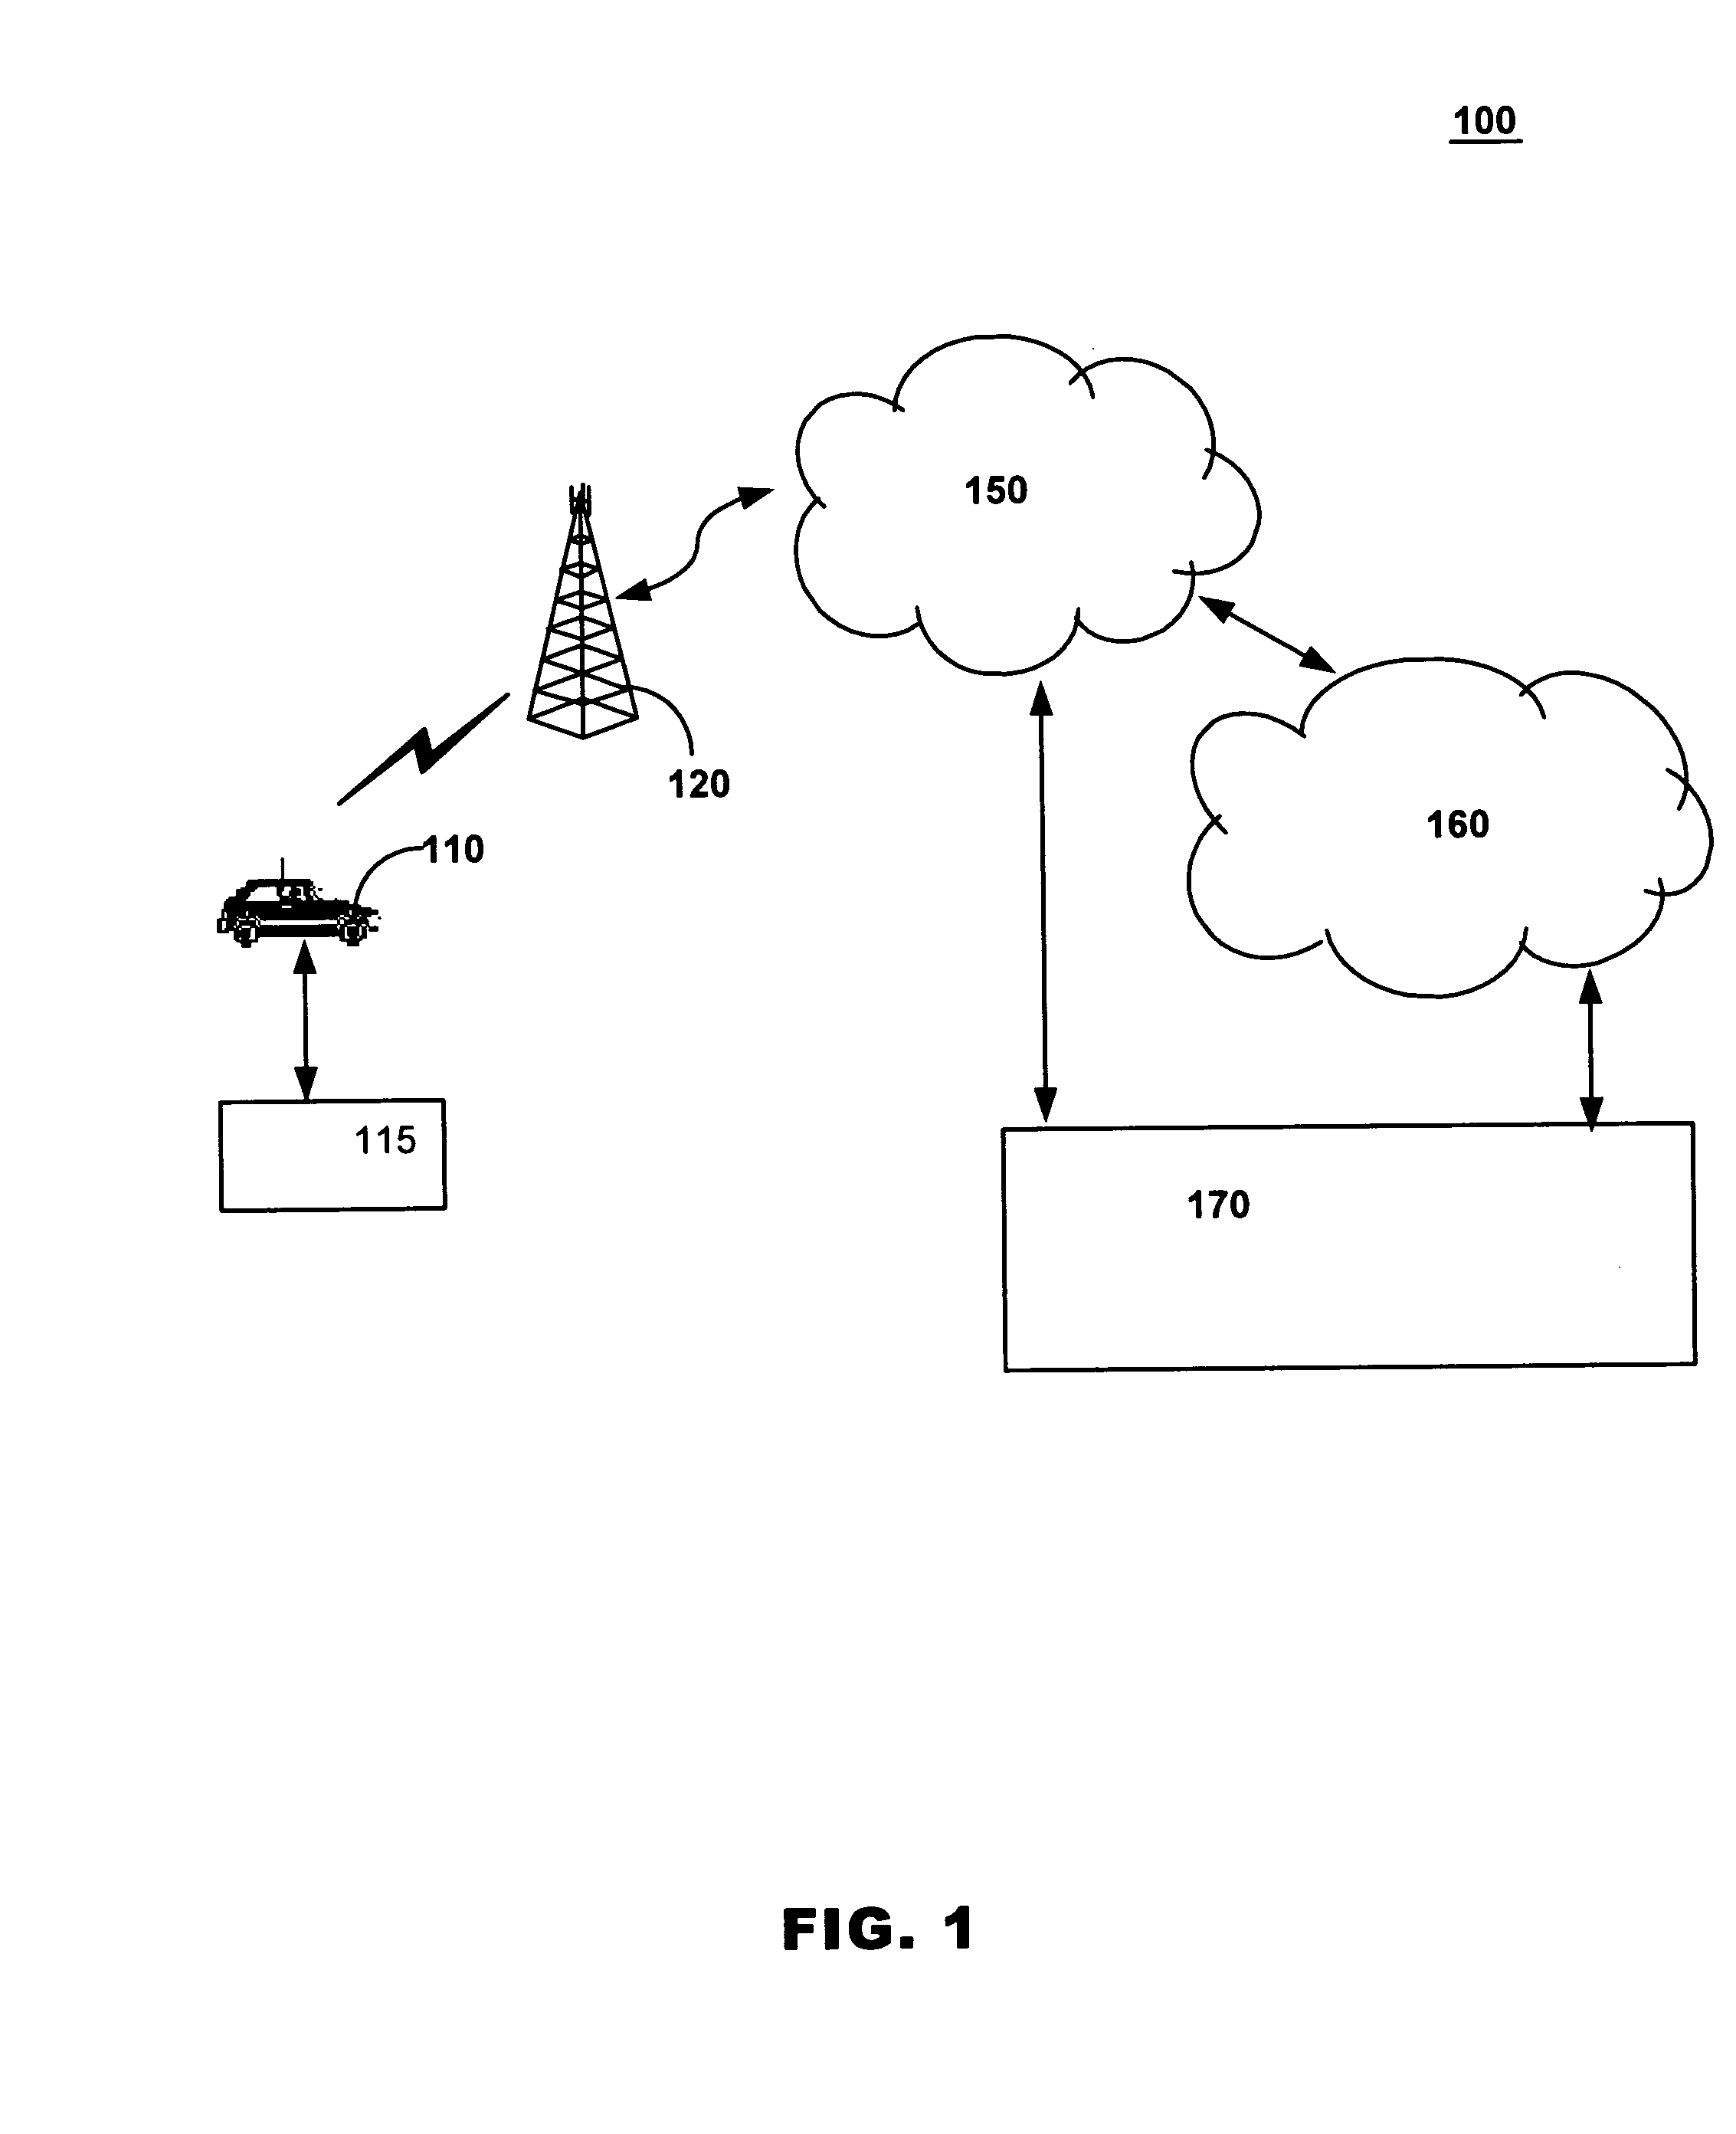 Method and system for providing flexible vehicle communication within a vehicle communications system